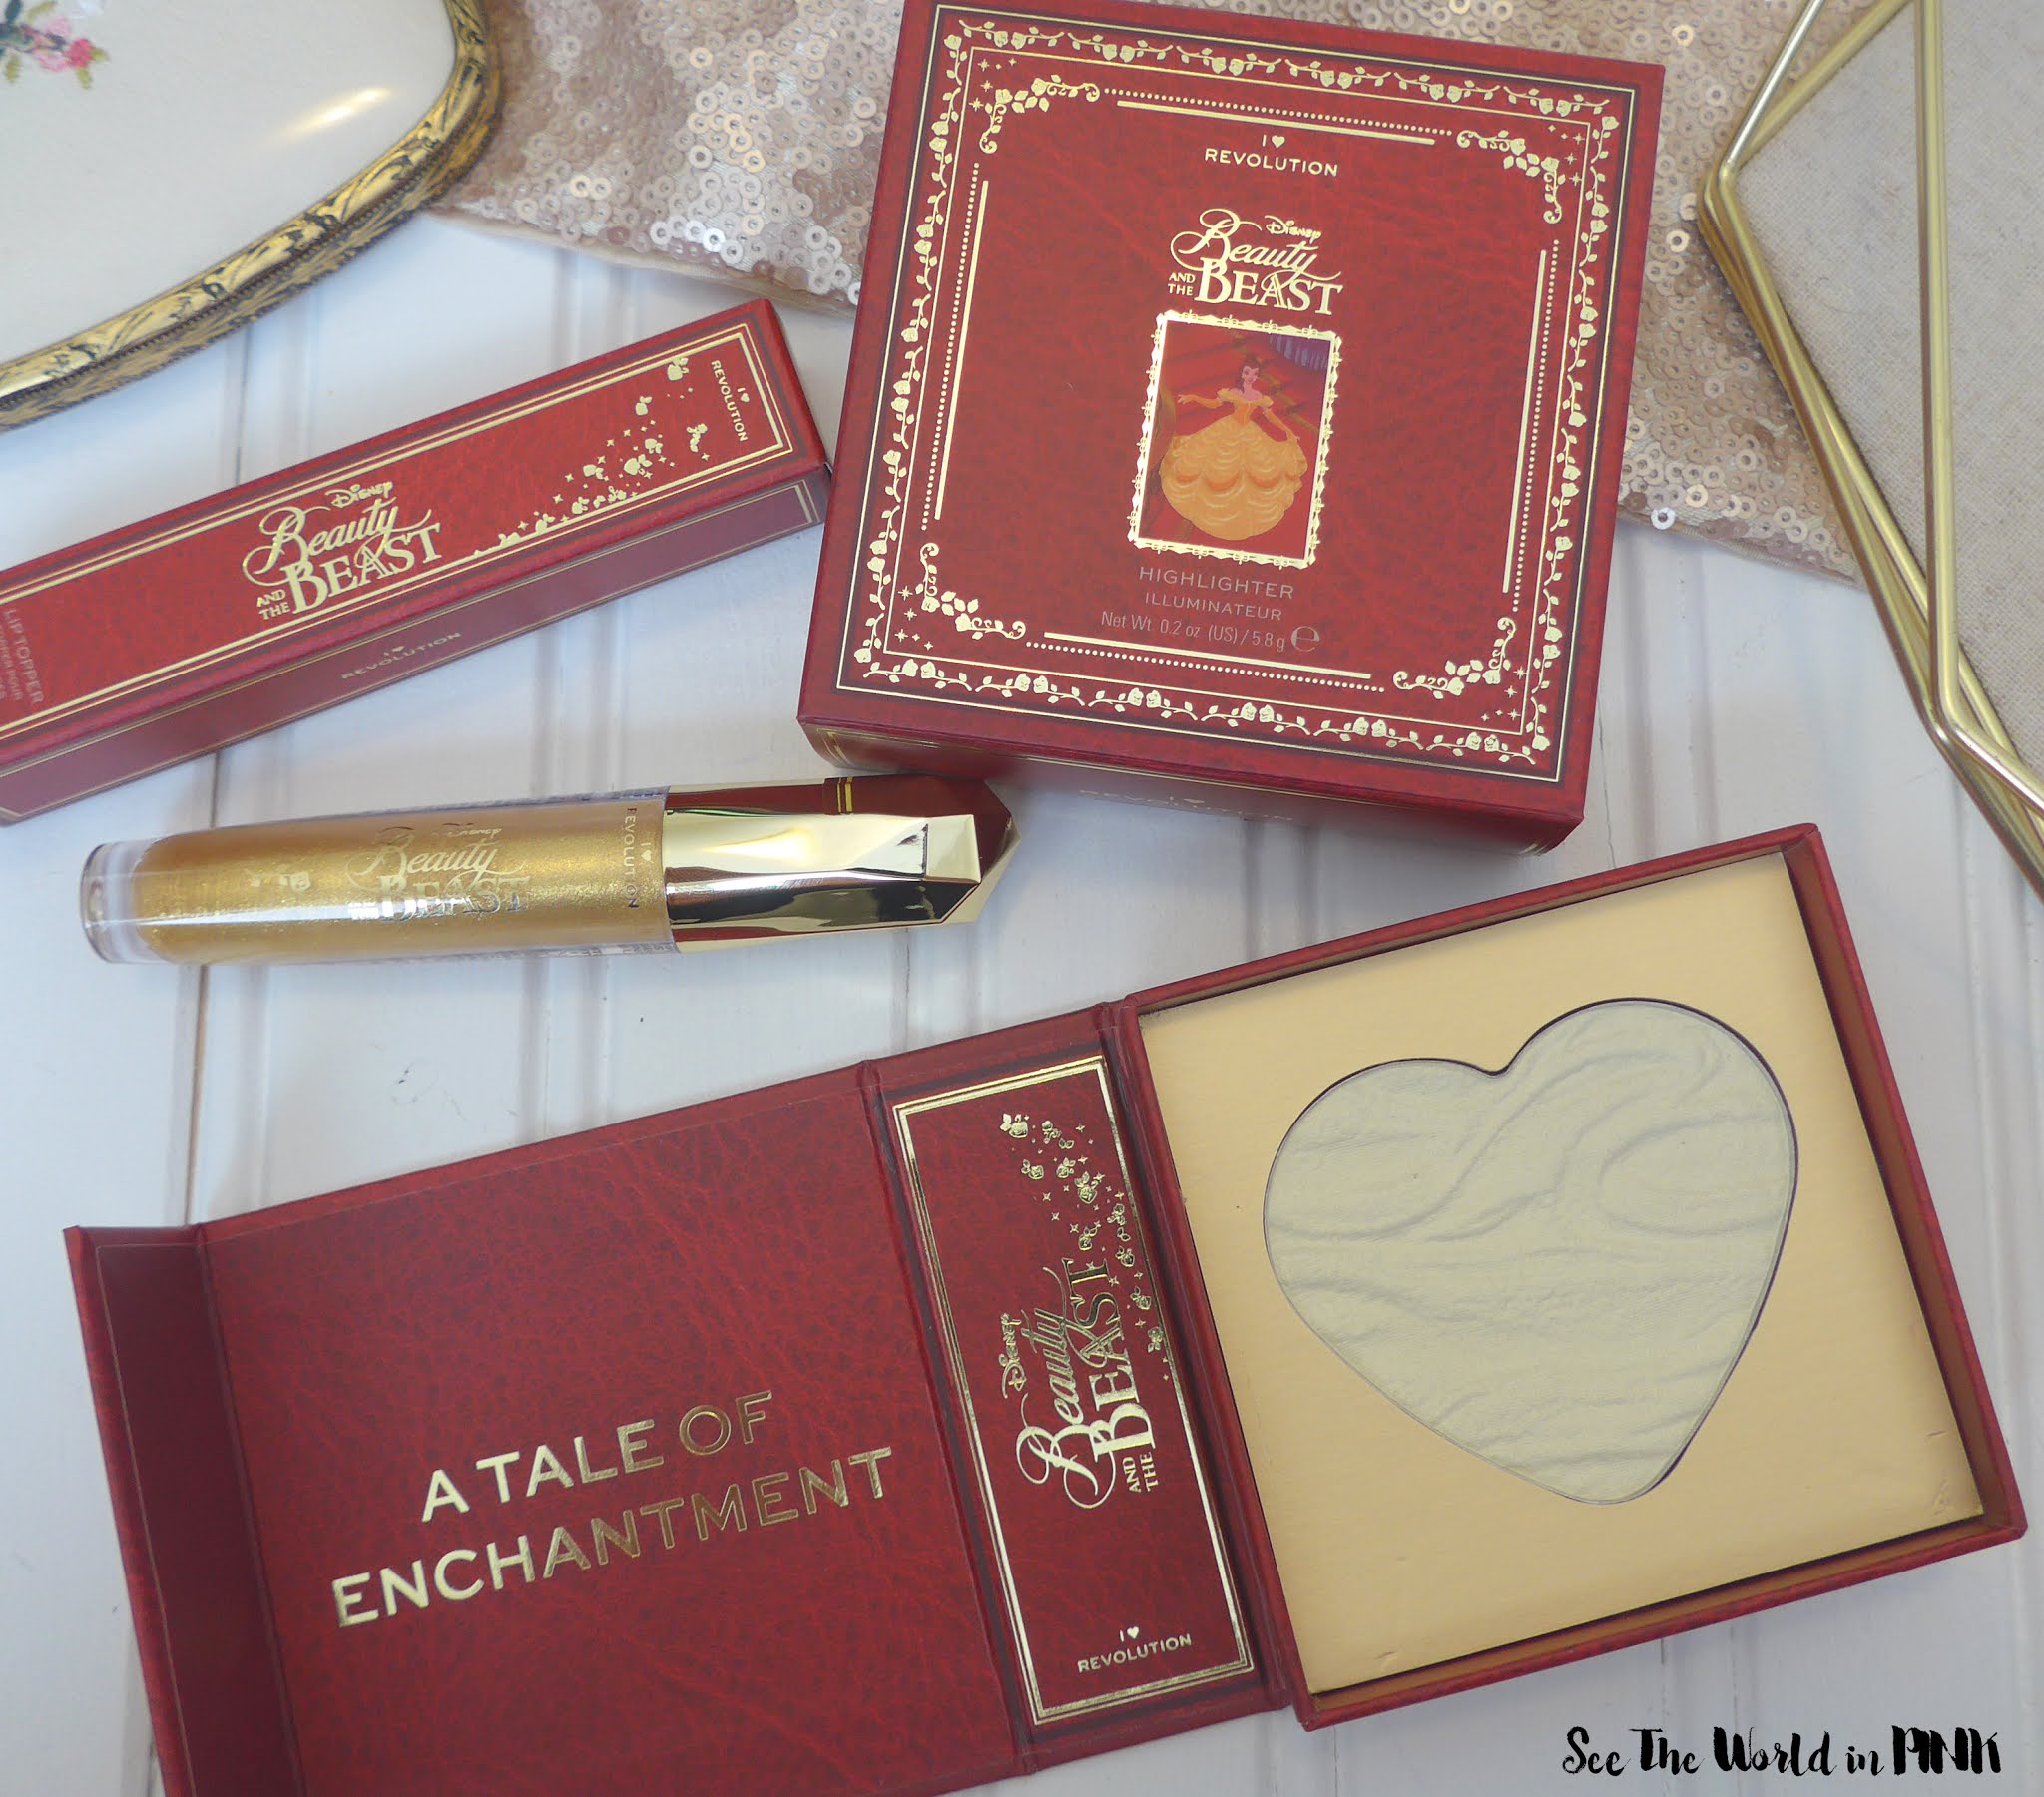 I Tried The Makeup Revolution "I Heart Revolution x Disney Fairytale Books Belle" Products So You Don't Have To...